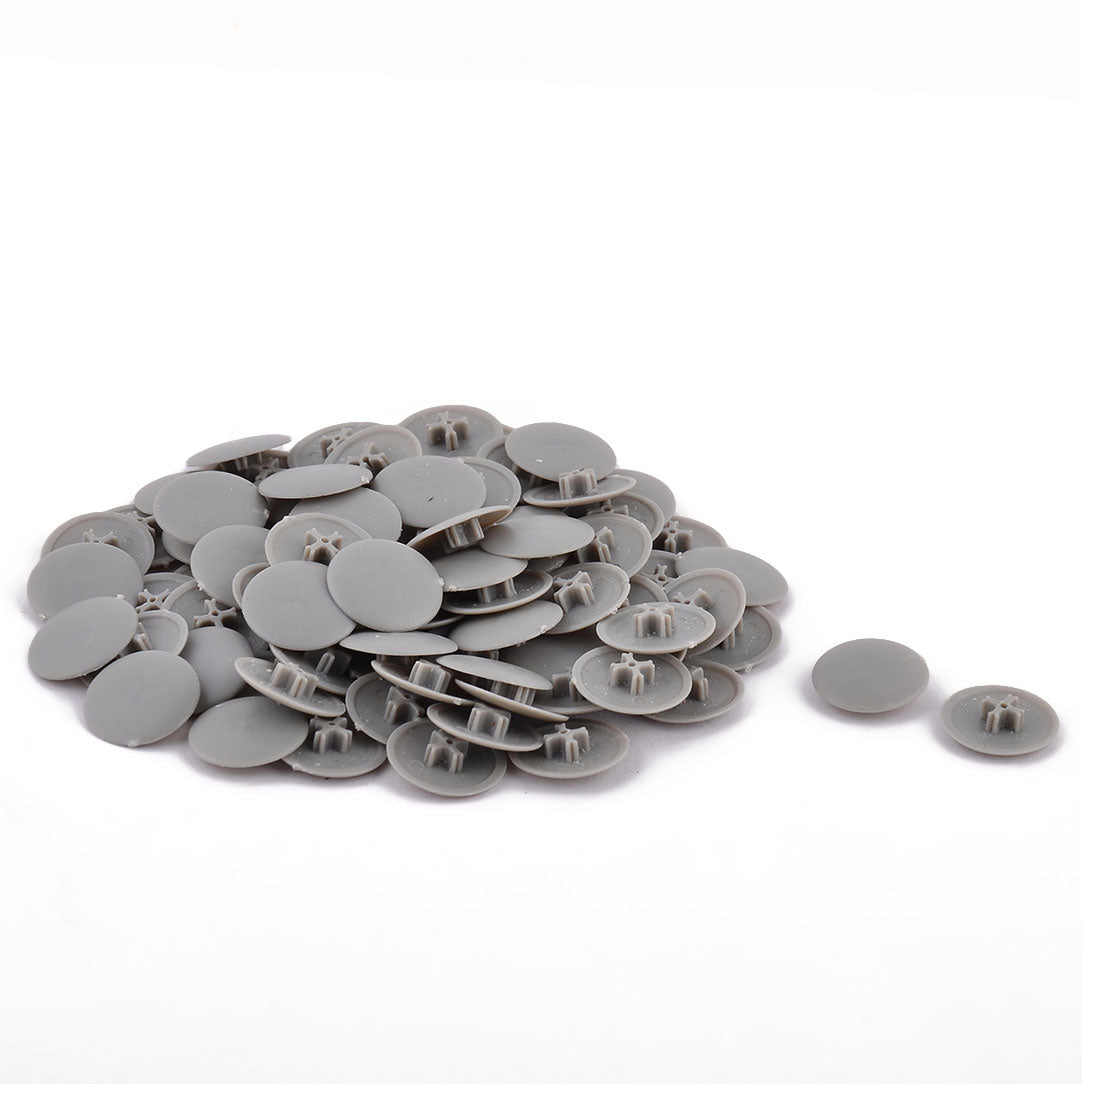 Uxcell Uxcell 17mm Dia 4mm Thickness Plastic Round Shape Cross Phillips Screw Cap Gray 100 PCS